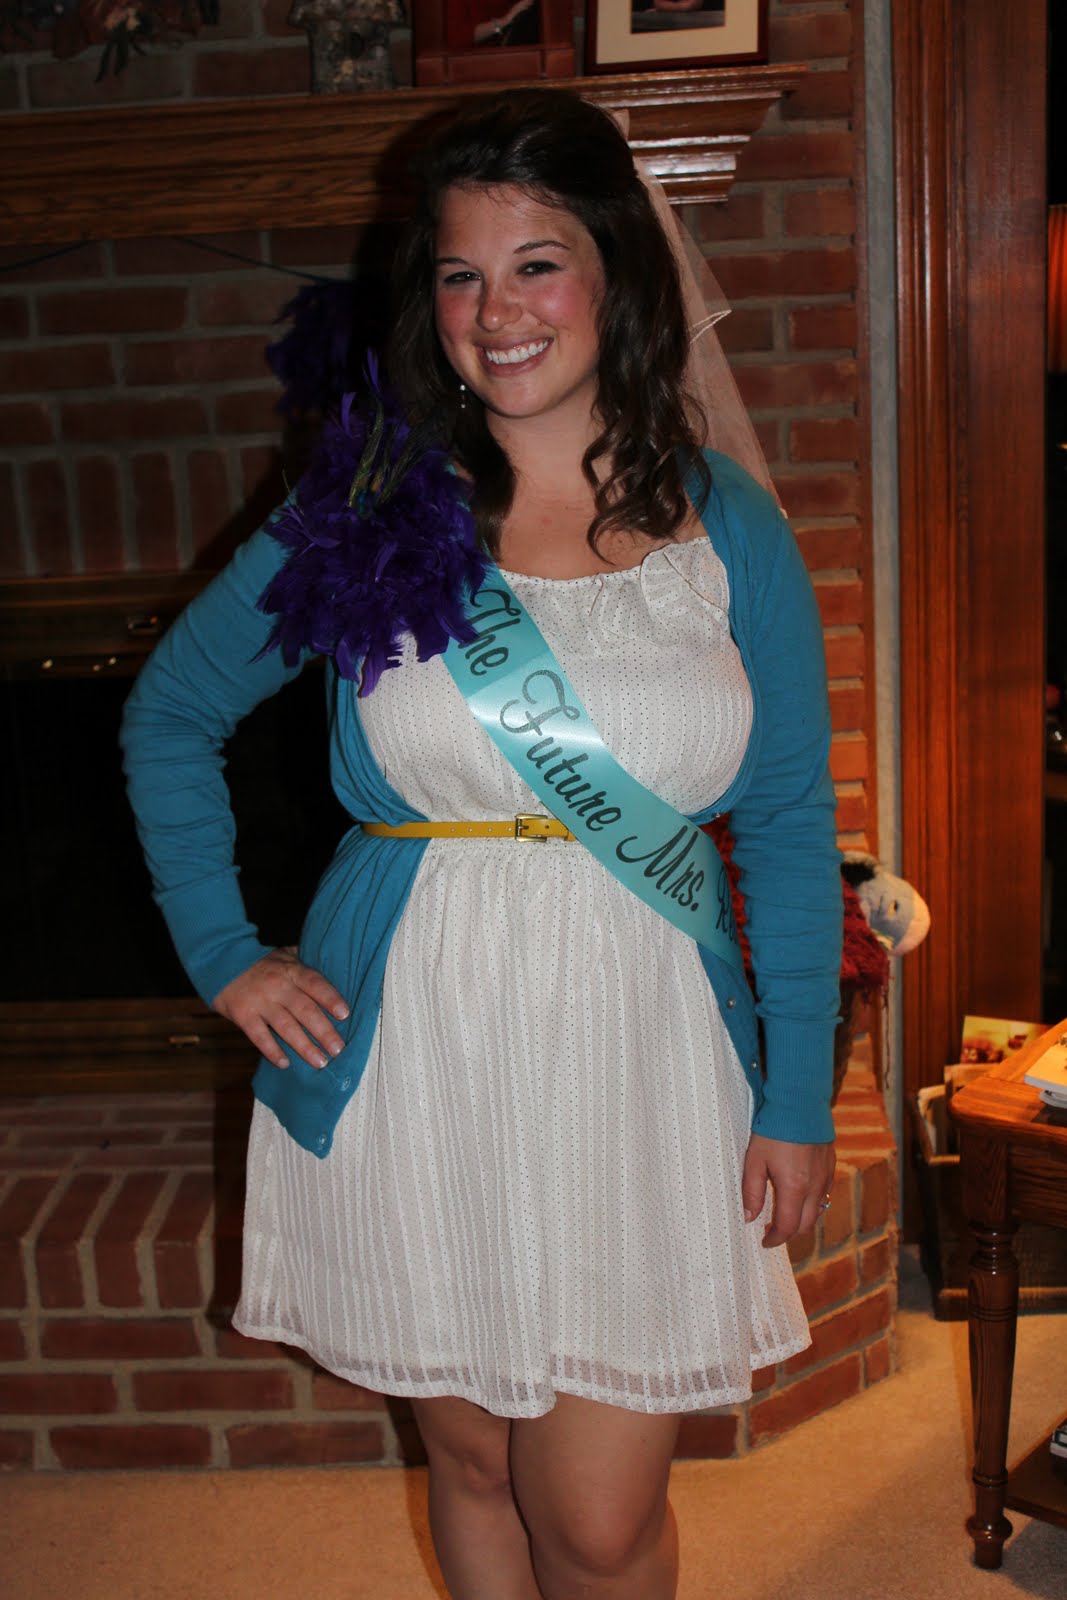 Lovin' my Life: My Sister's Bachelorette Party: Peacock Themed